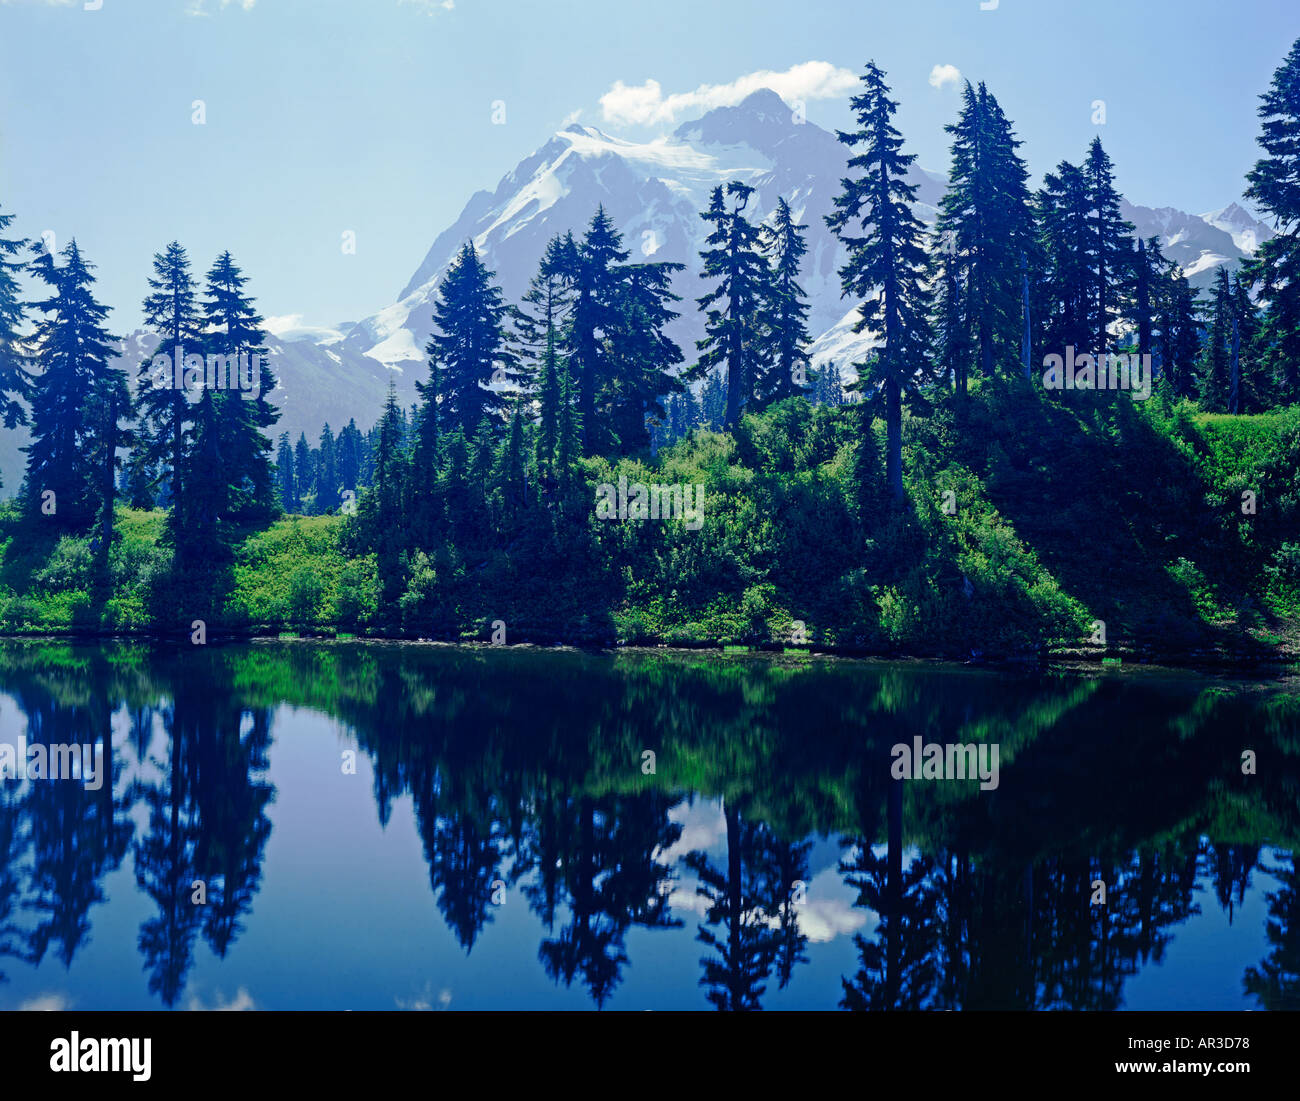 Mount Shuksan in the North Cascades National Park of Washington State USA reflected in Picture Lake Stock Photo